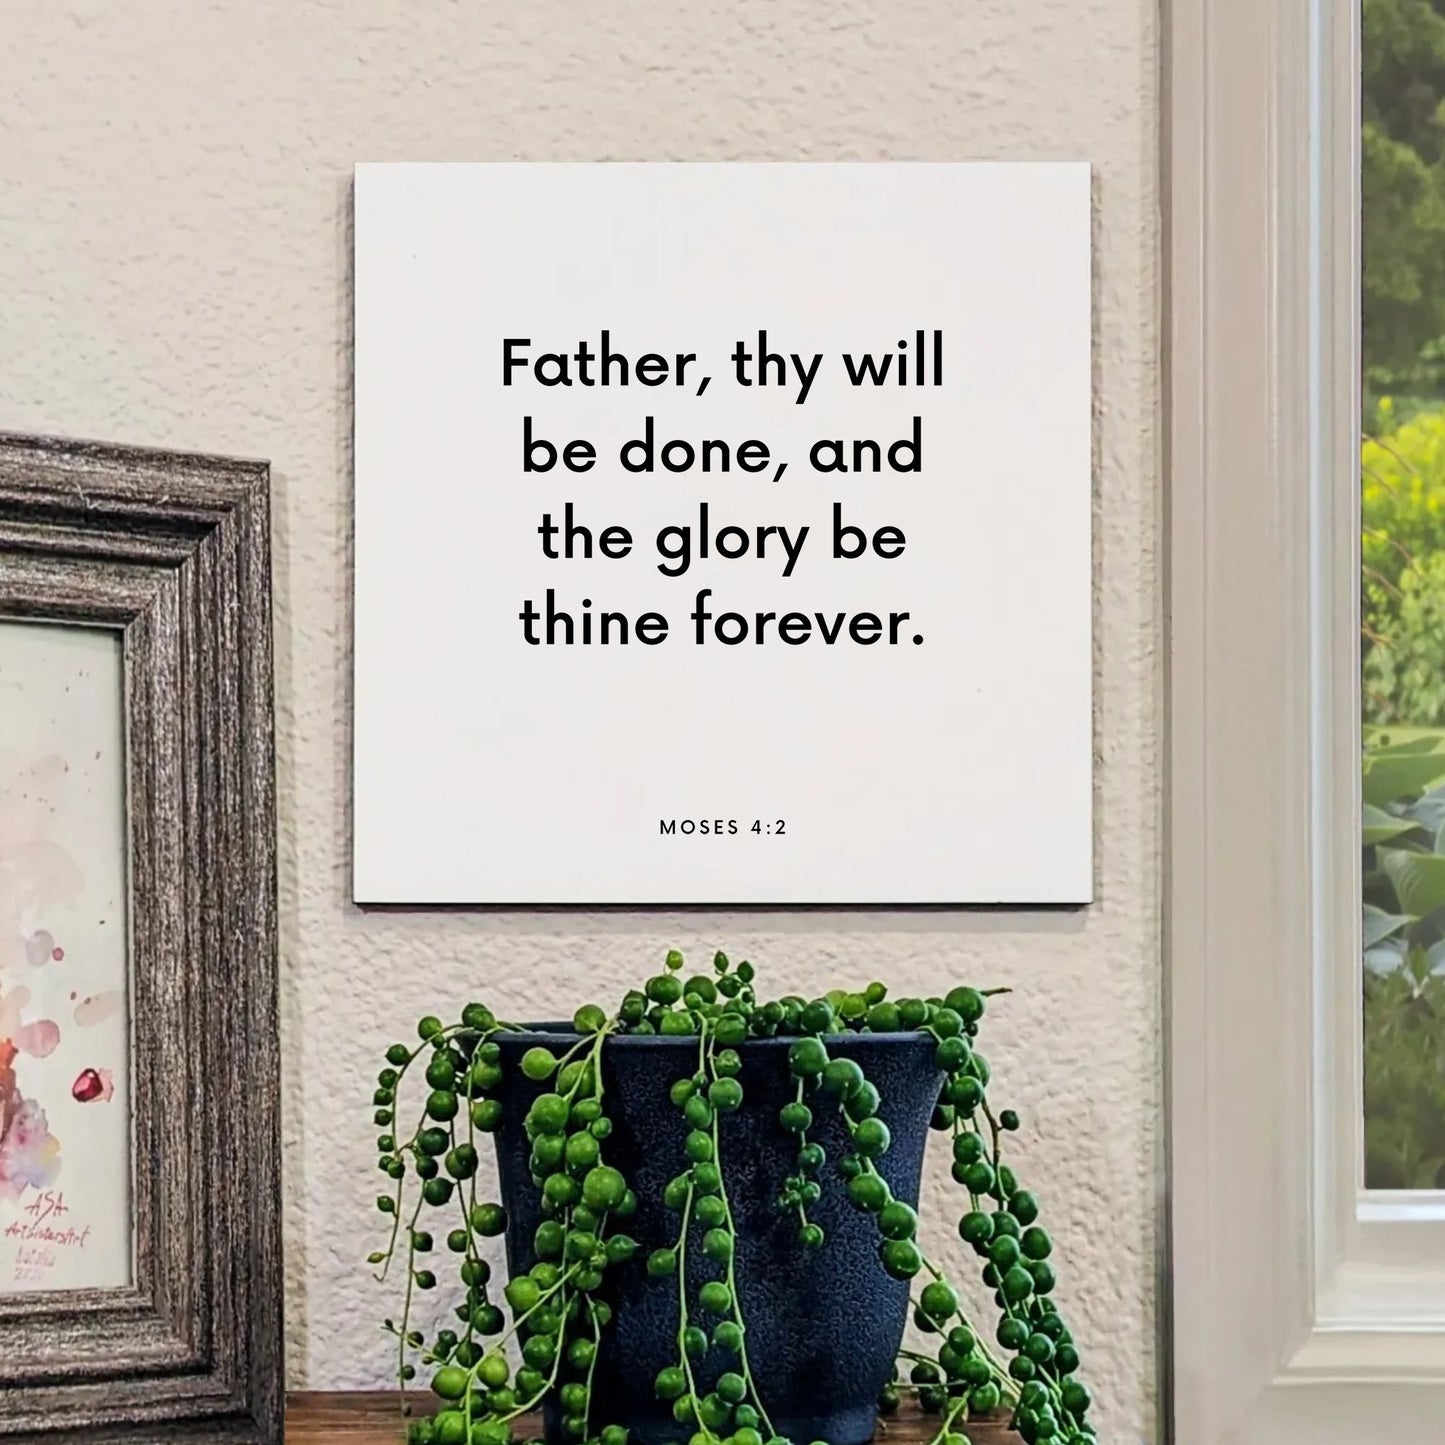 Window mouting of the scripture tile for Moses 4:2 - "Father, thy will be done, and the glory be thine forever"